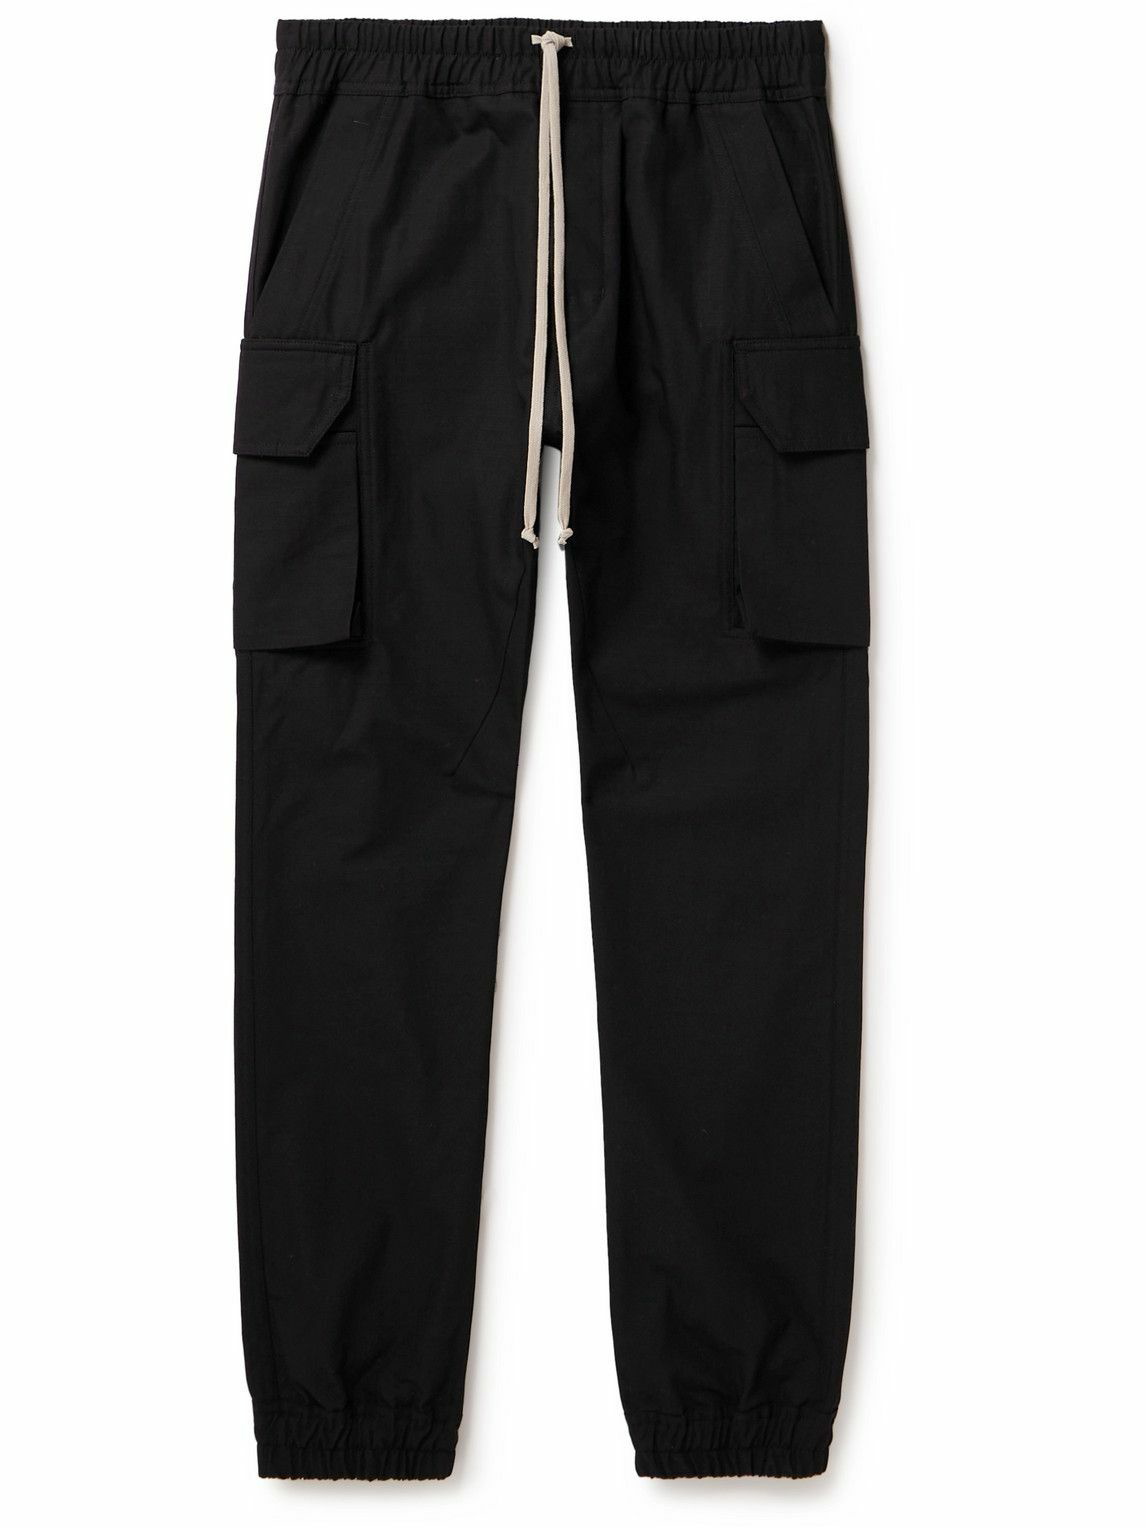 DRKSHDW by Rick Owens - Mastodon Slim-Fit Tapered Cotton-Ripstop Drawstring  Cargo Trousers - Black